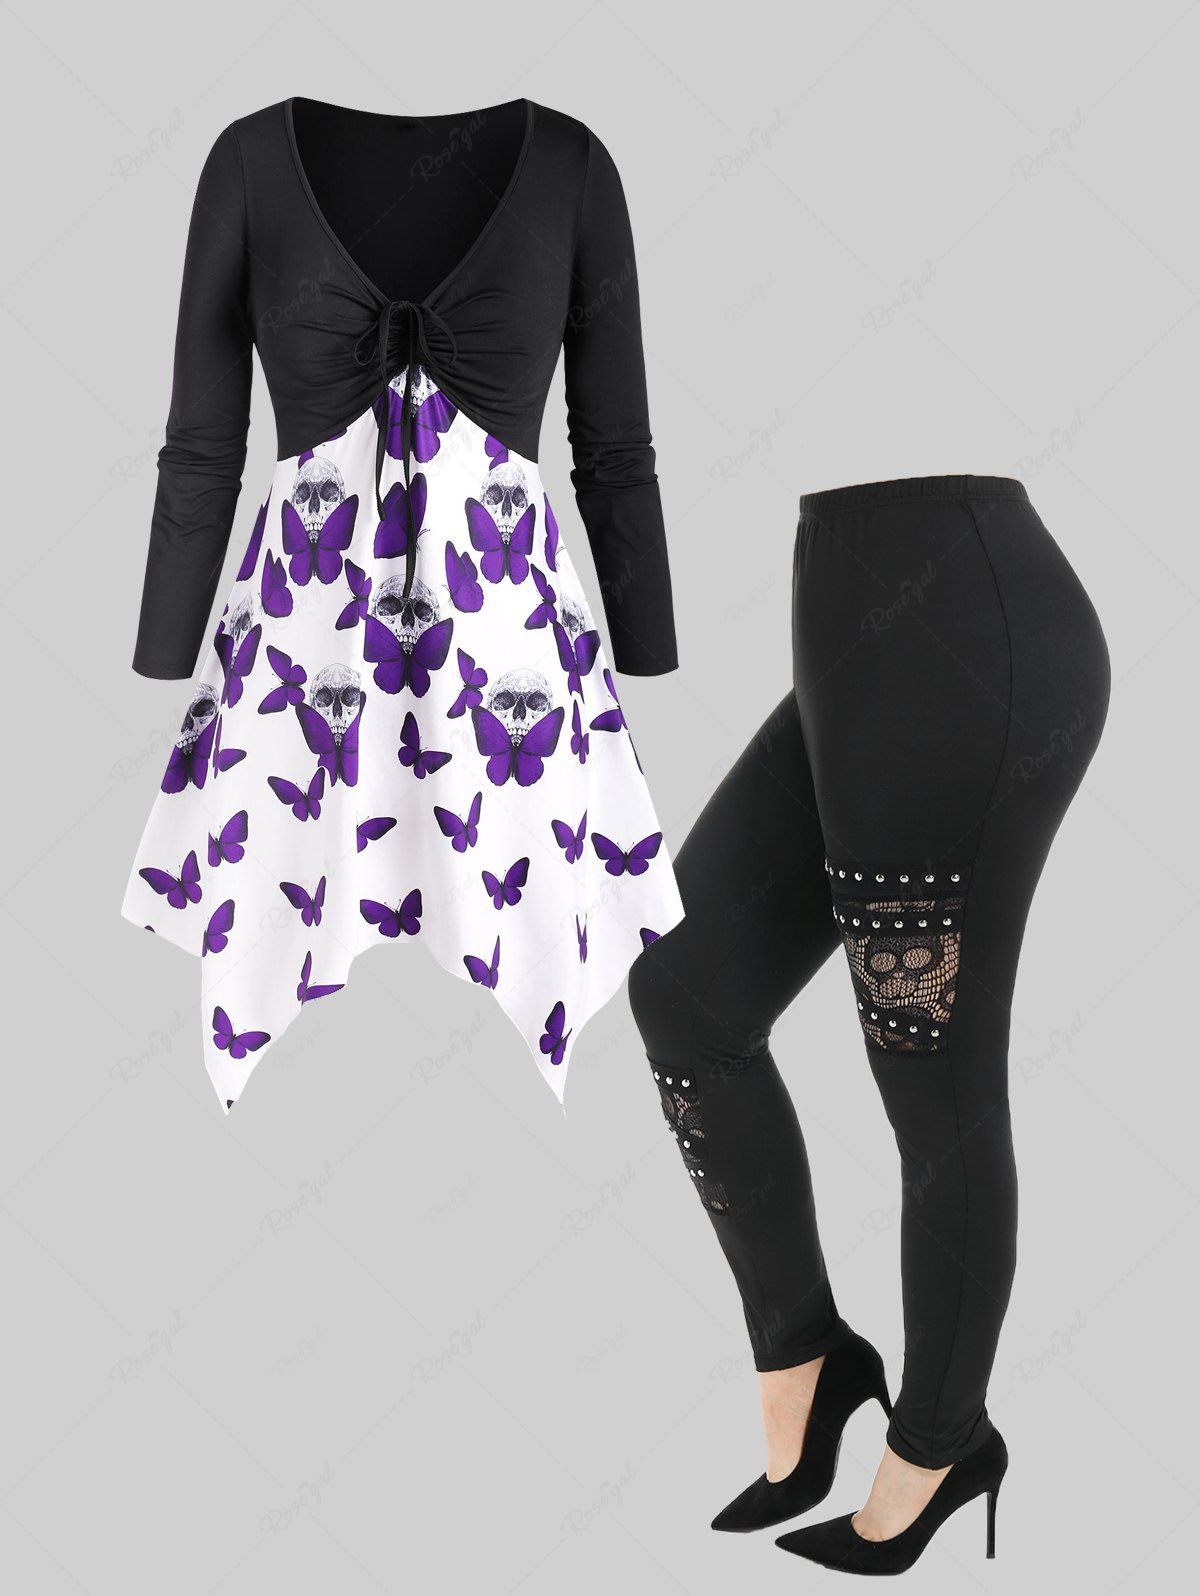 Hot Cinched Front Skull Butterfly Handkerchief Top and Skull Lace Panel Studded Pants Gothic Outfit  